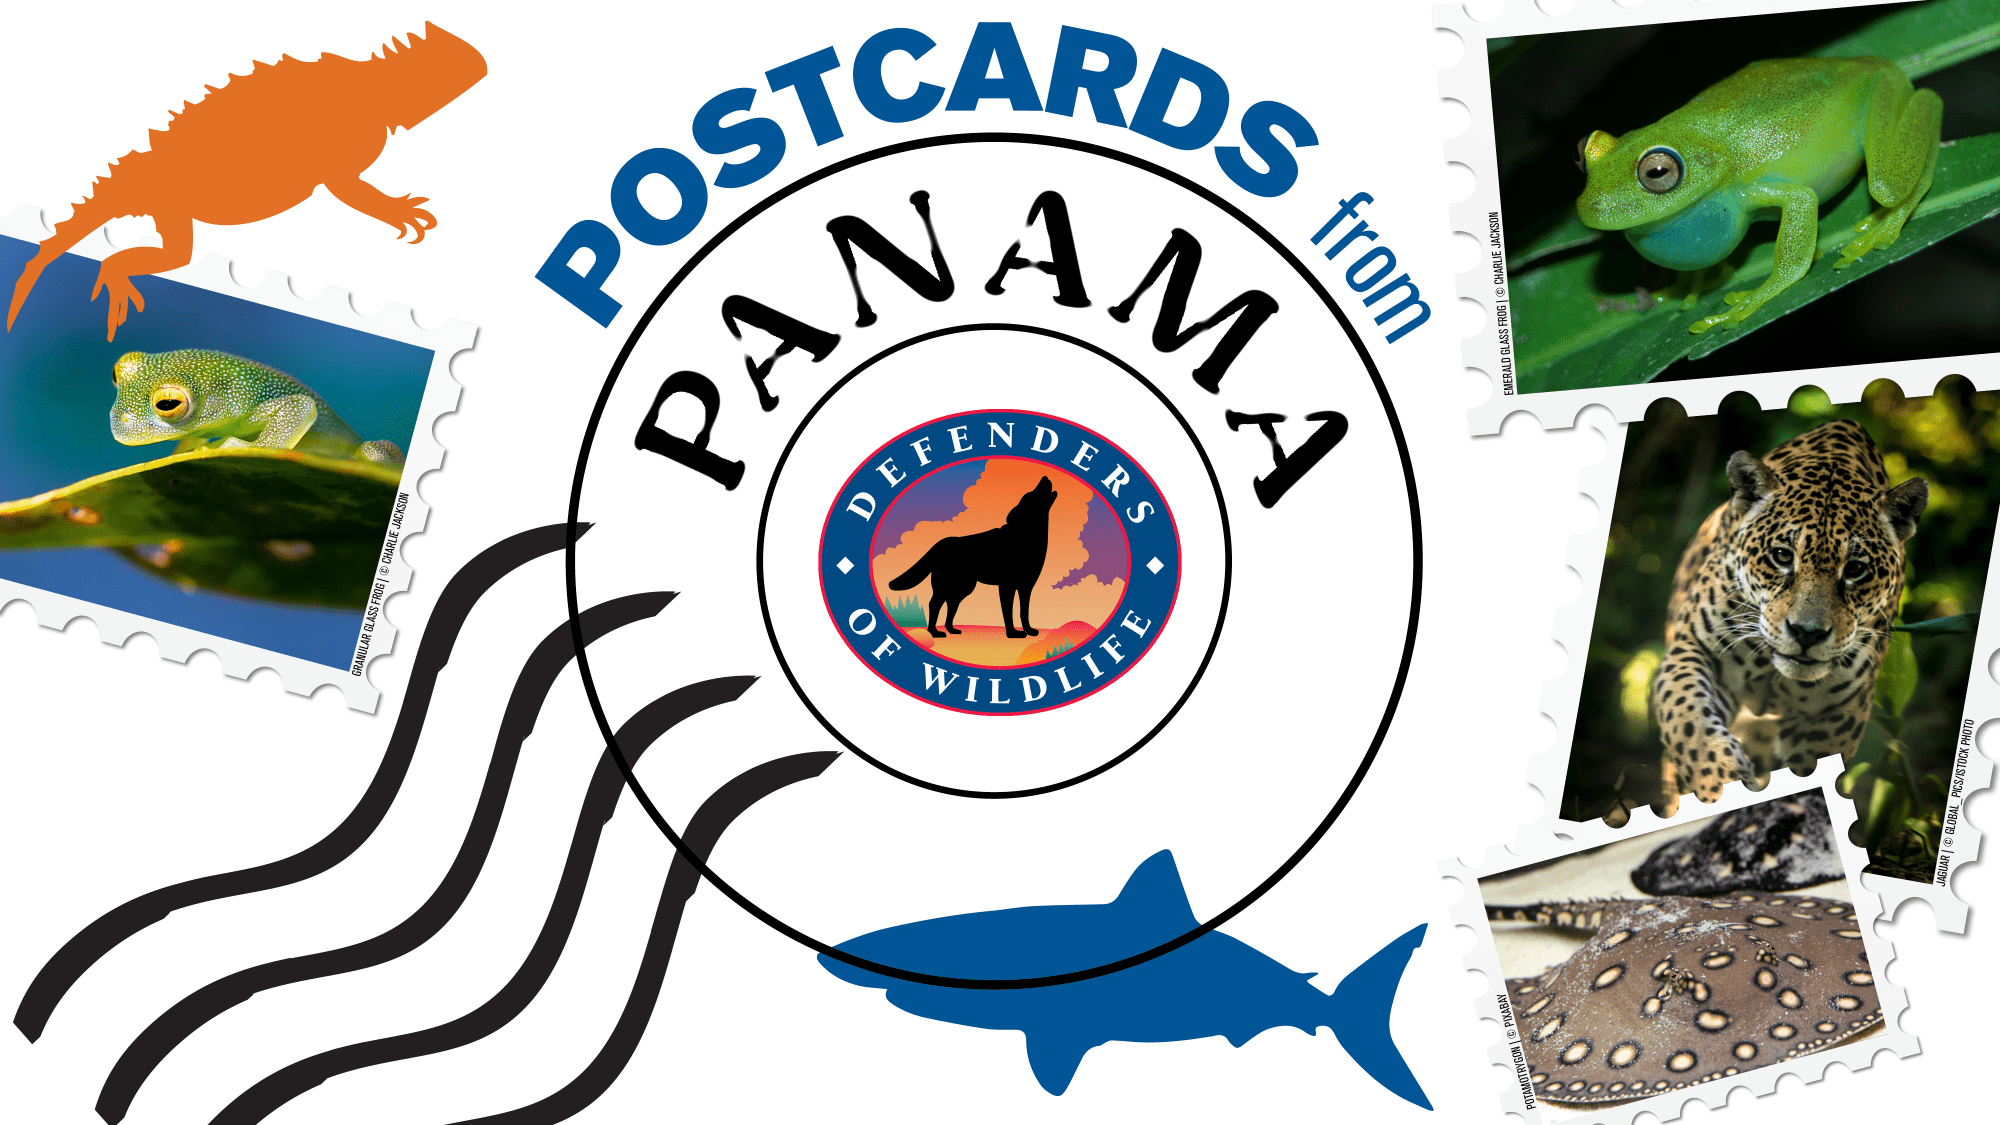 Postcards from Panama